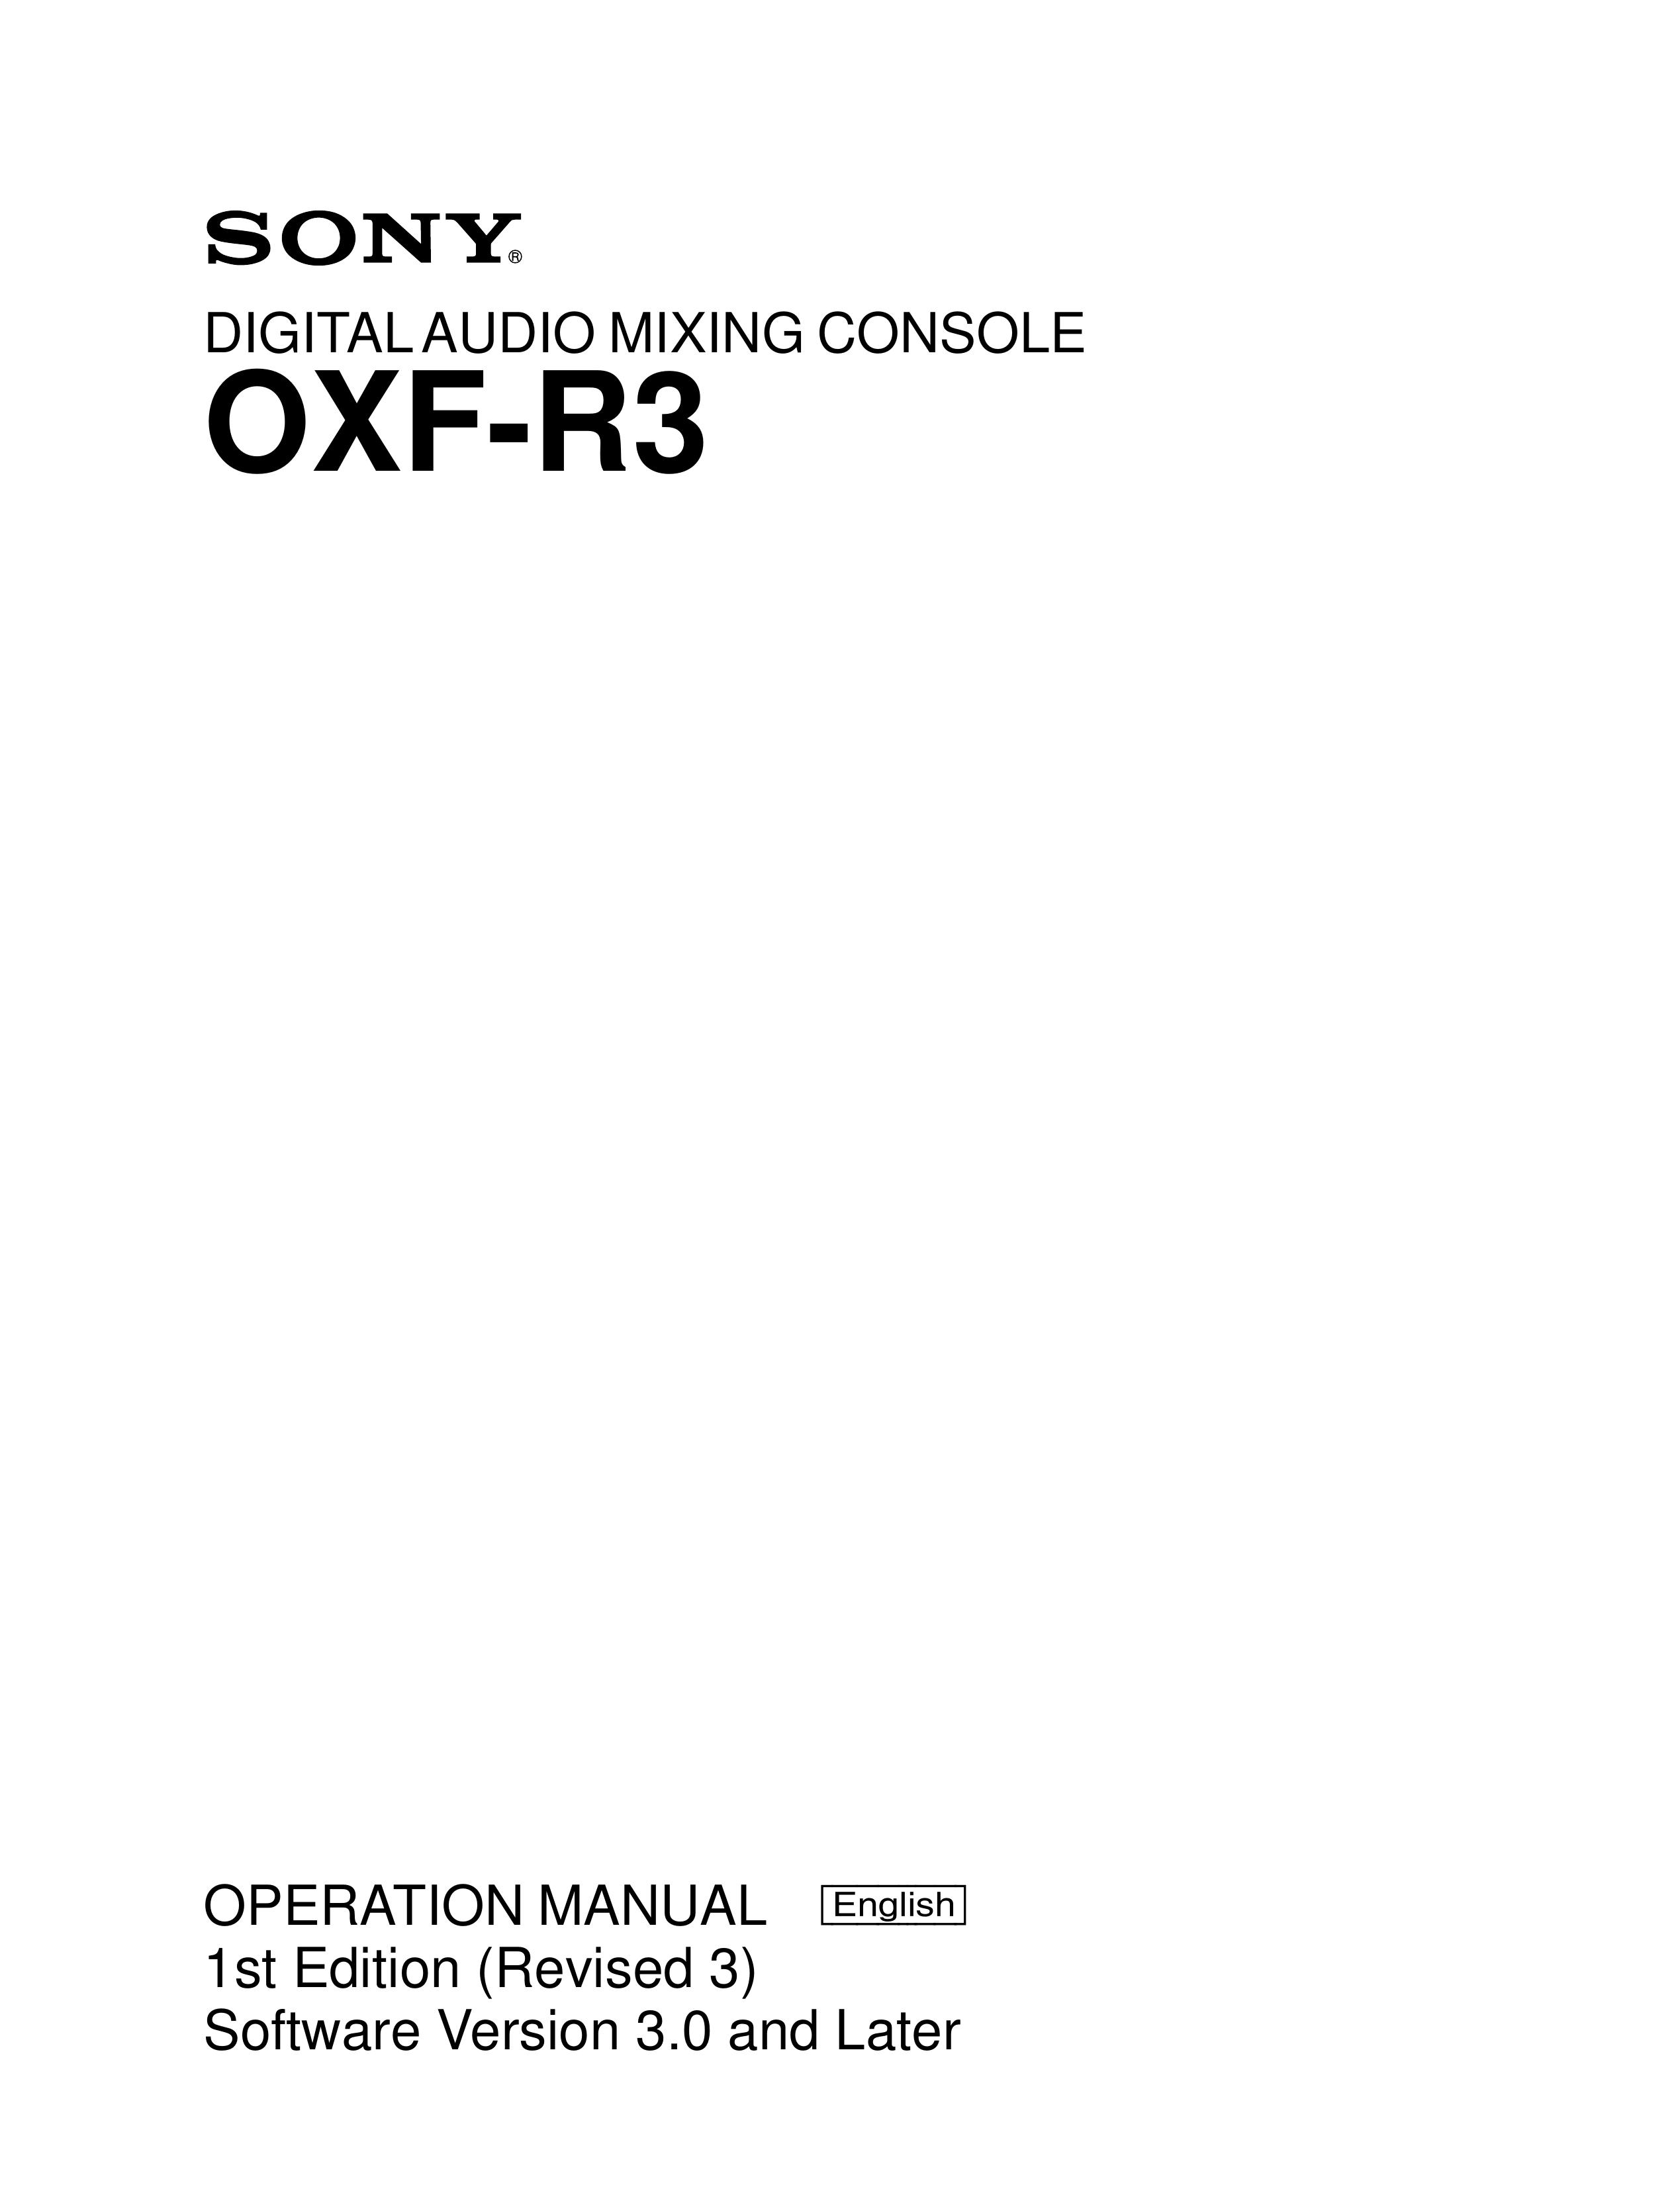 Sony OXF-R3 Music Mixer User Manual